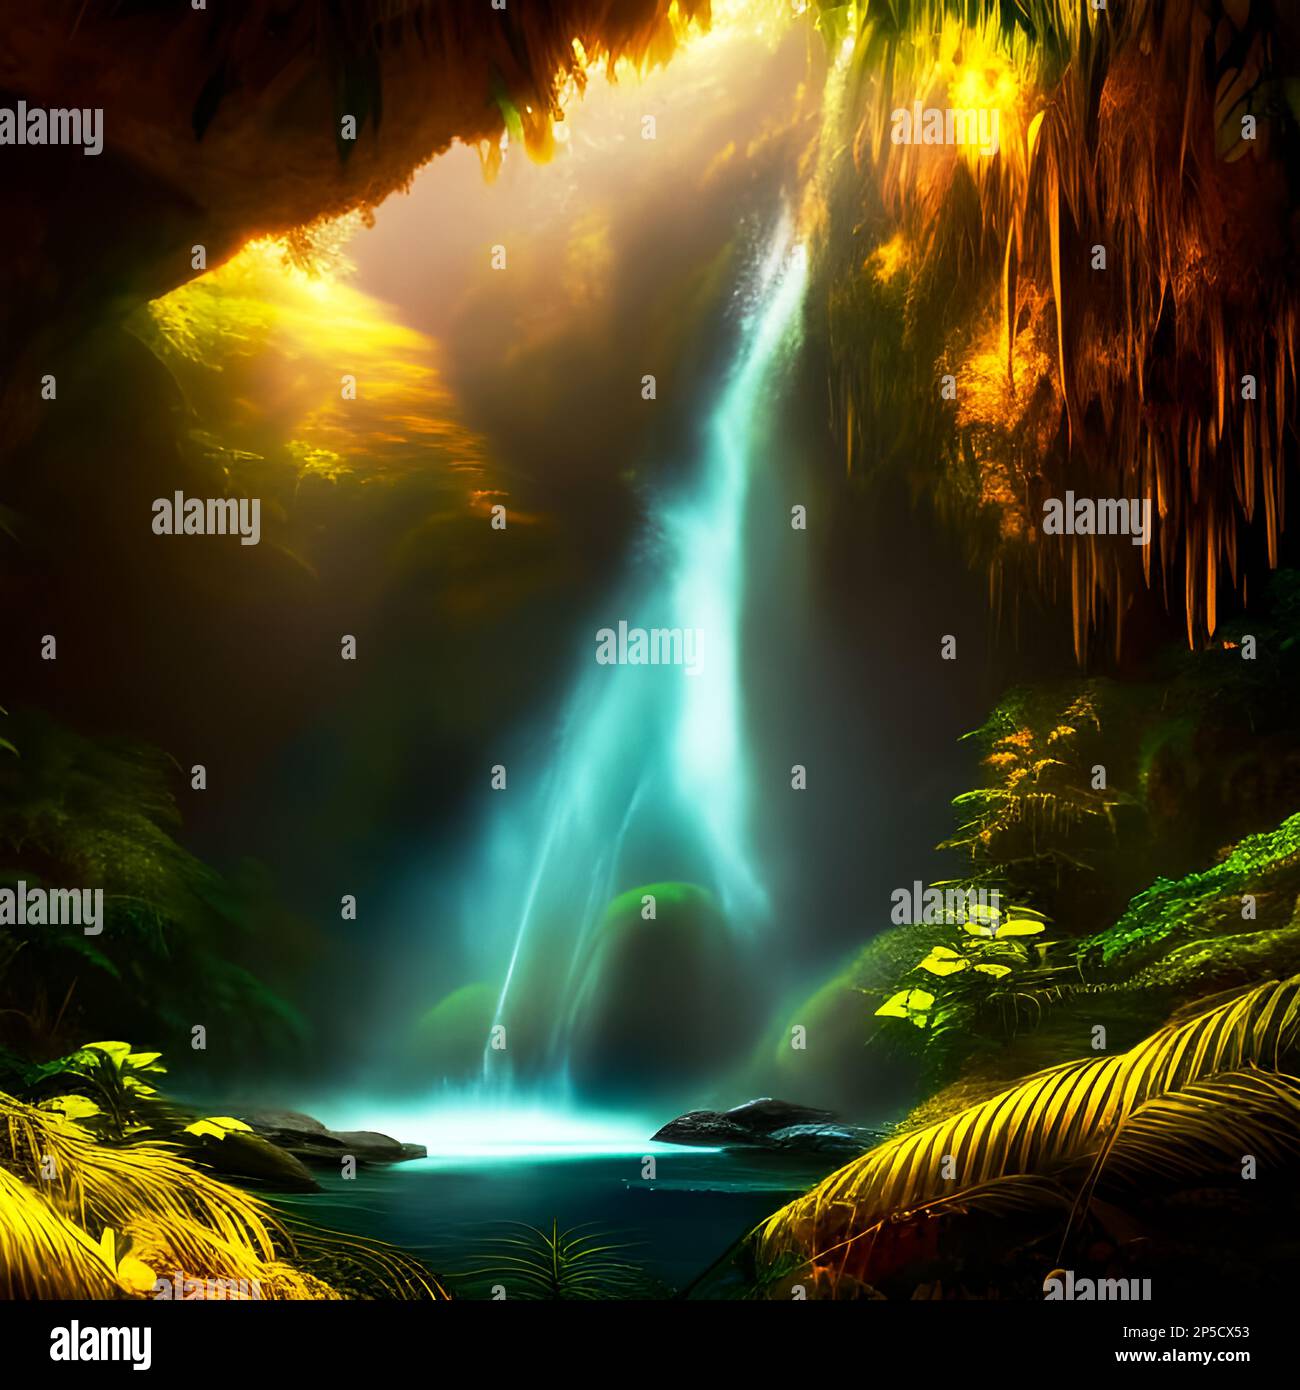 Waterfall in the Garden of Eden depiction. Edited AI generated image Stock Photo